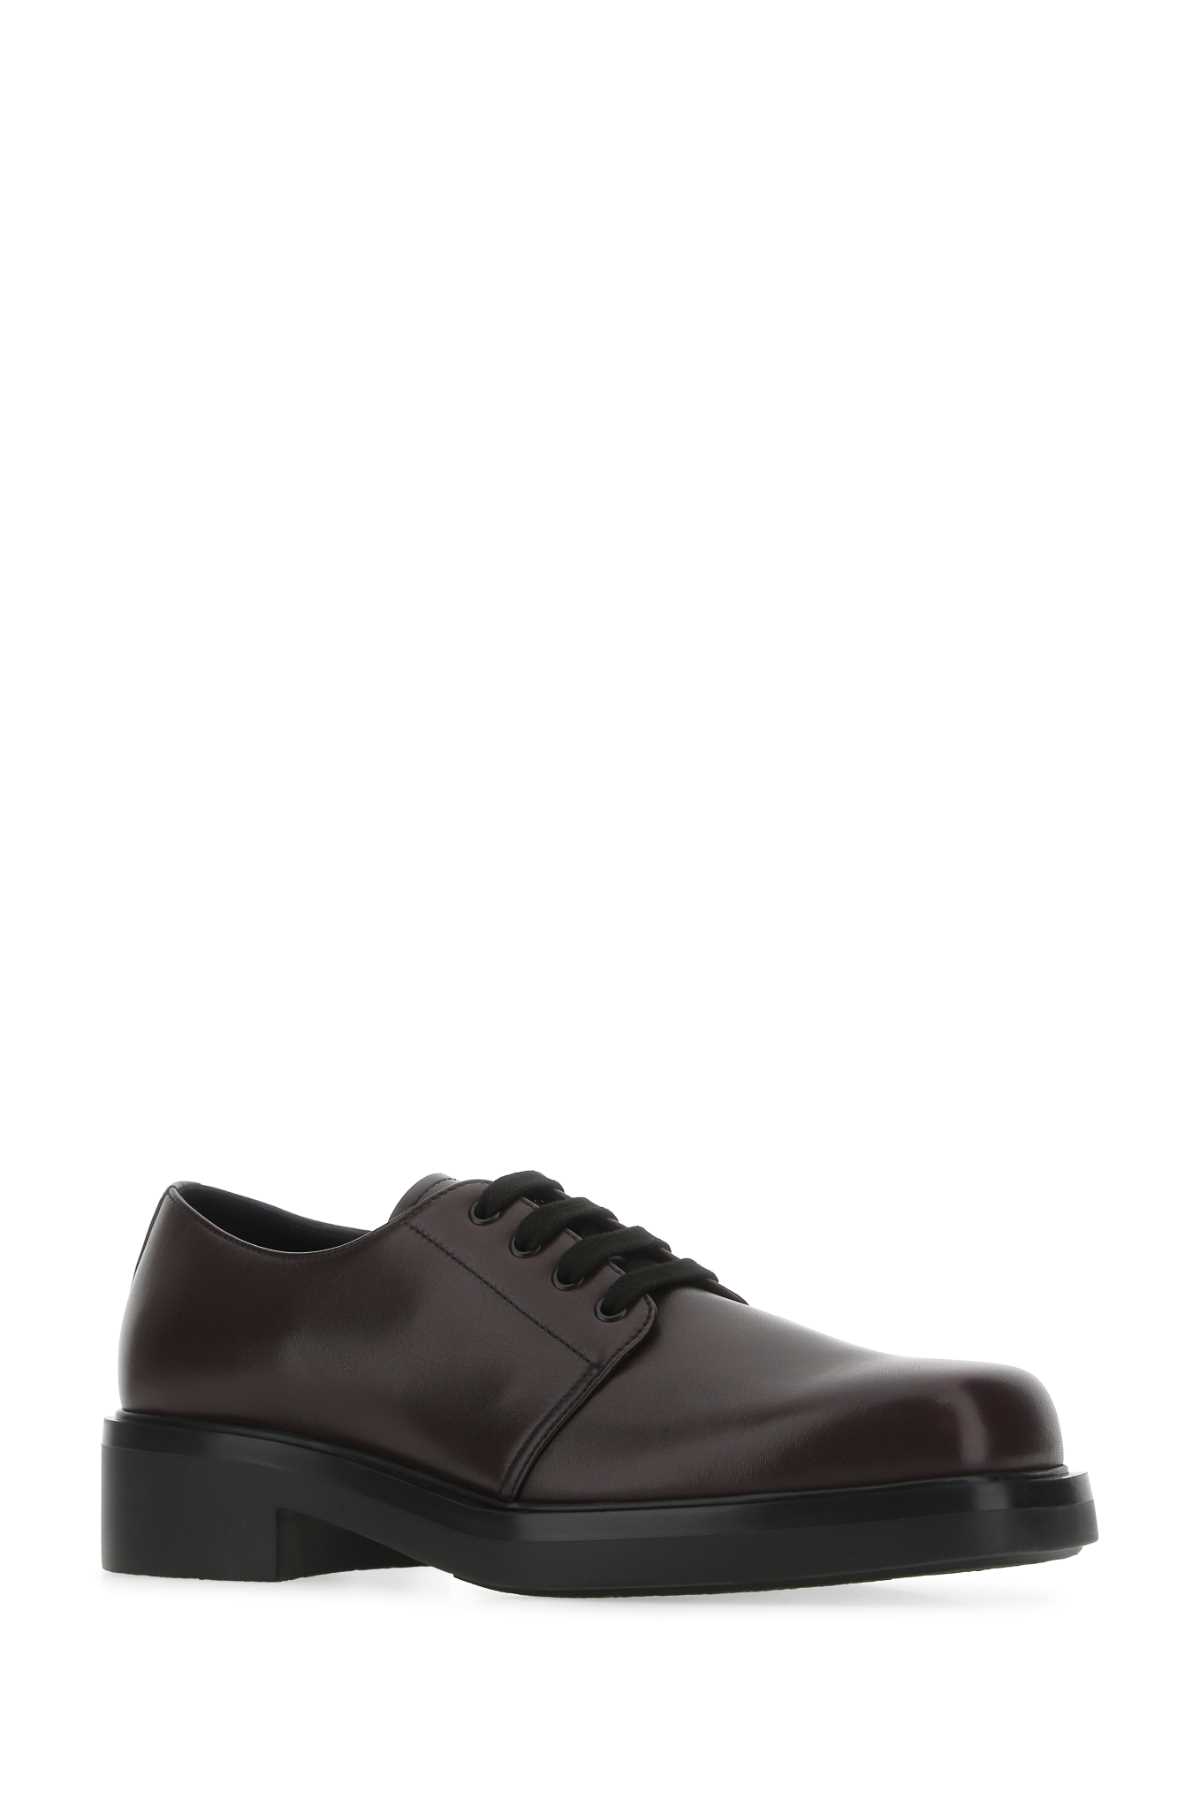 Shop Prada Aubergine Leather Lace-up Shoes In F0397